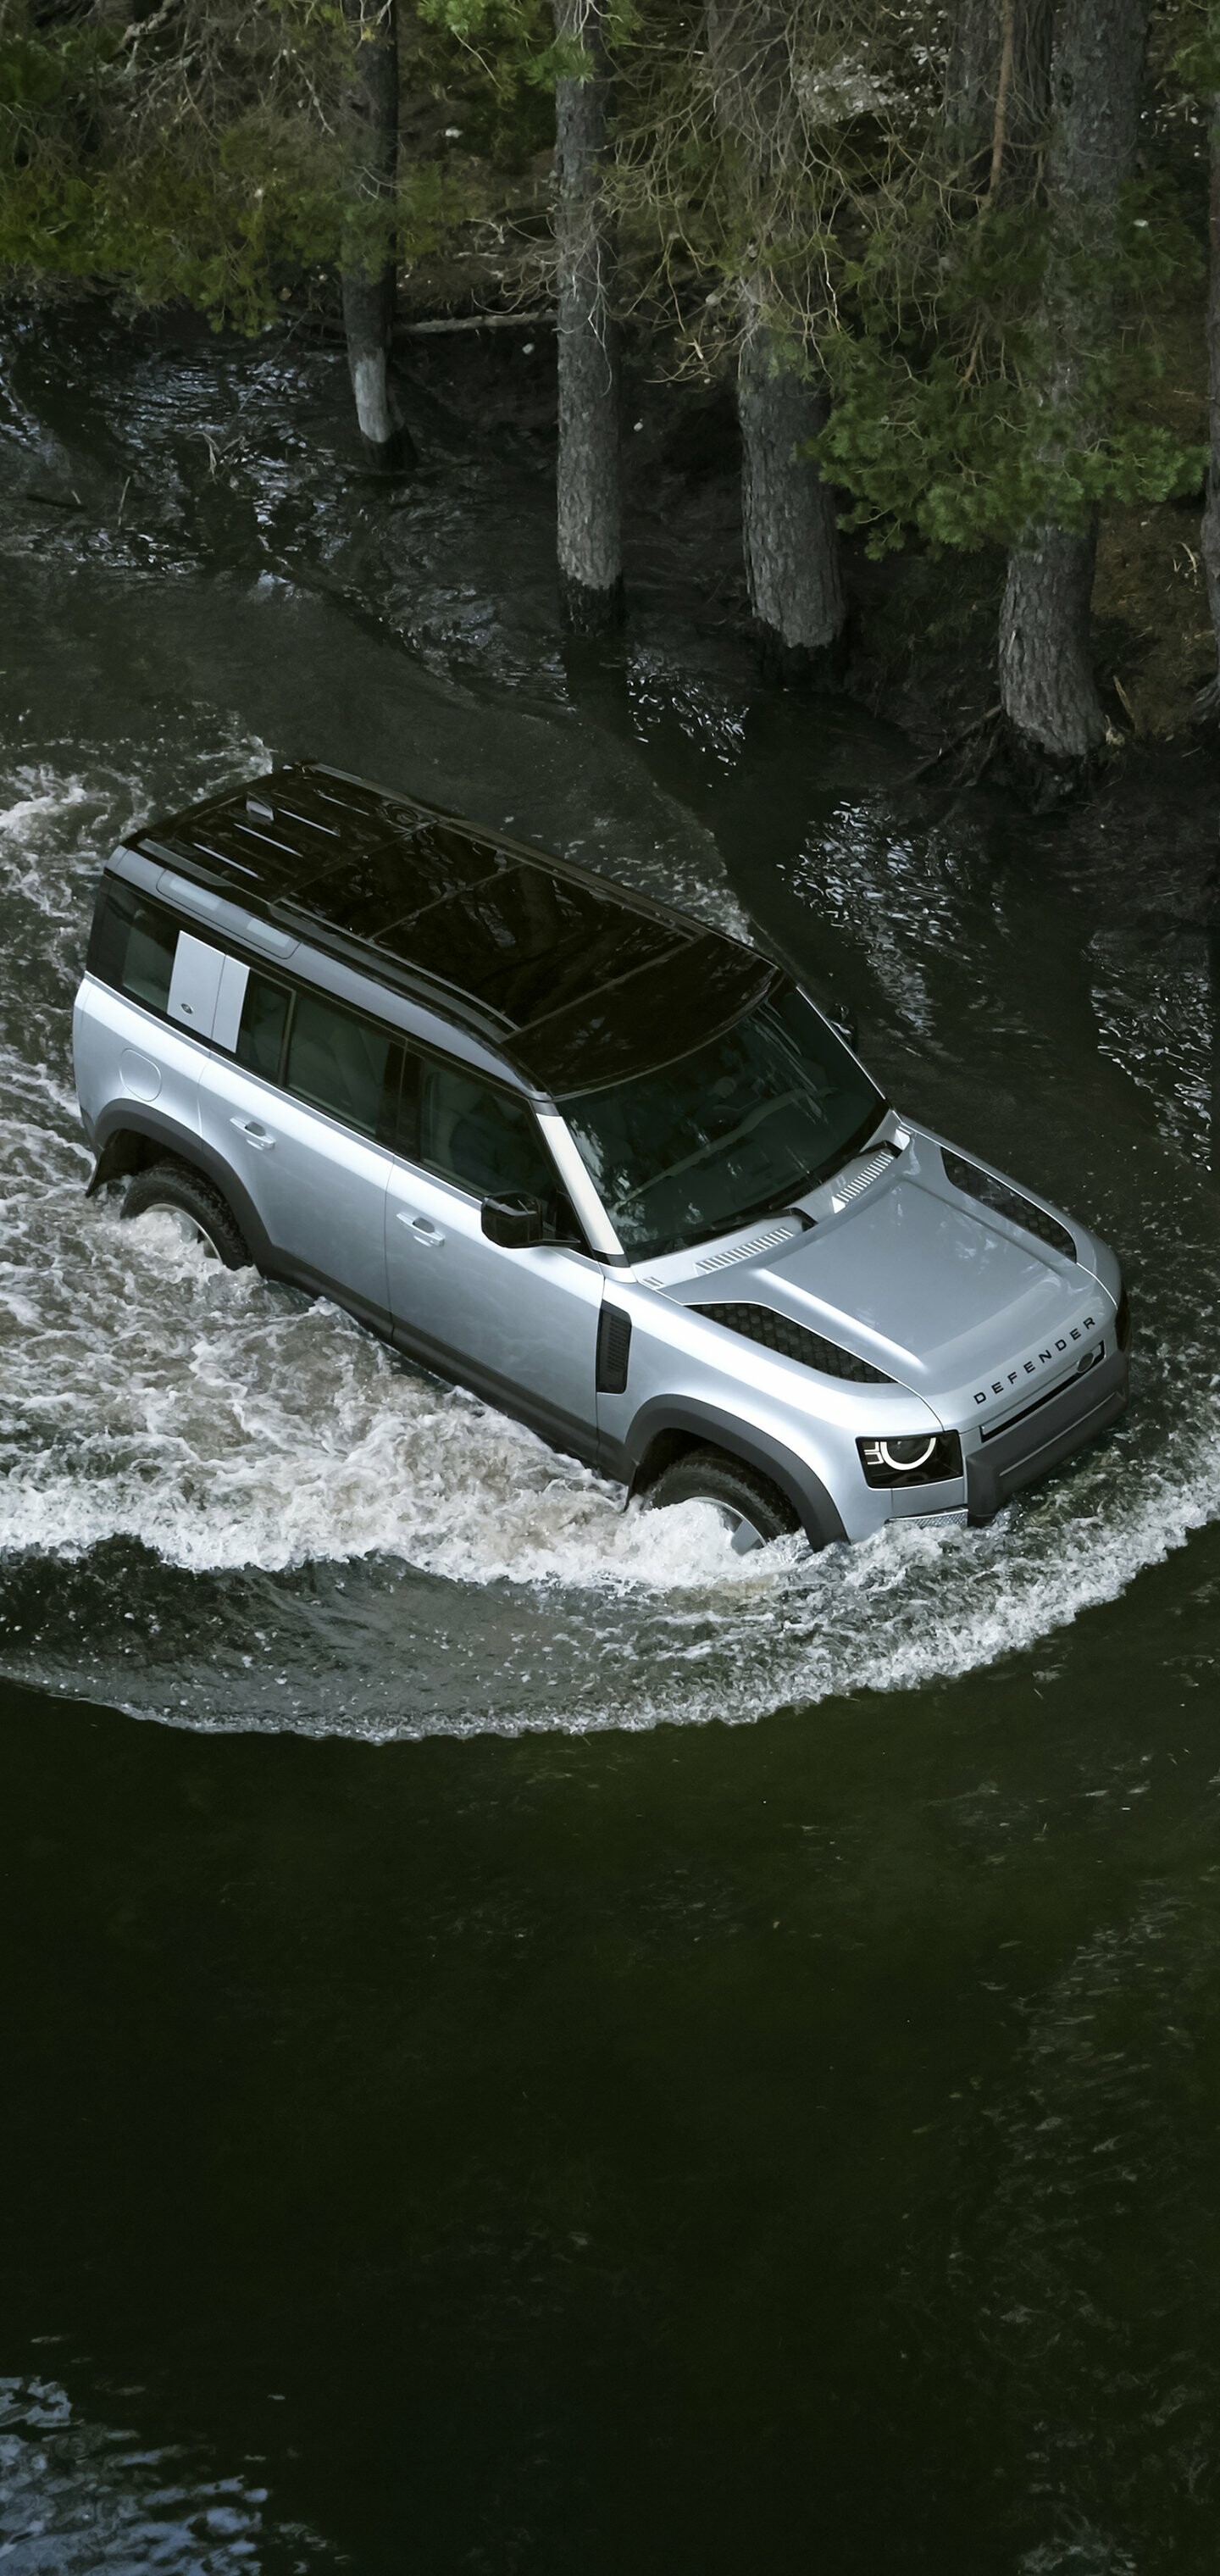 Land Rover: Vehicles, Defender, The brand of four-wheel drive, off-road capable models. 1440x3040 HD Background.